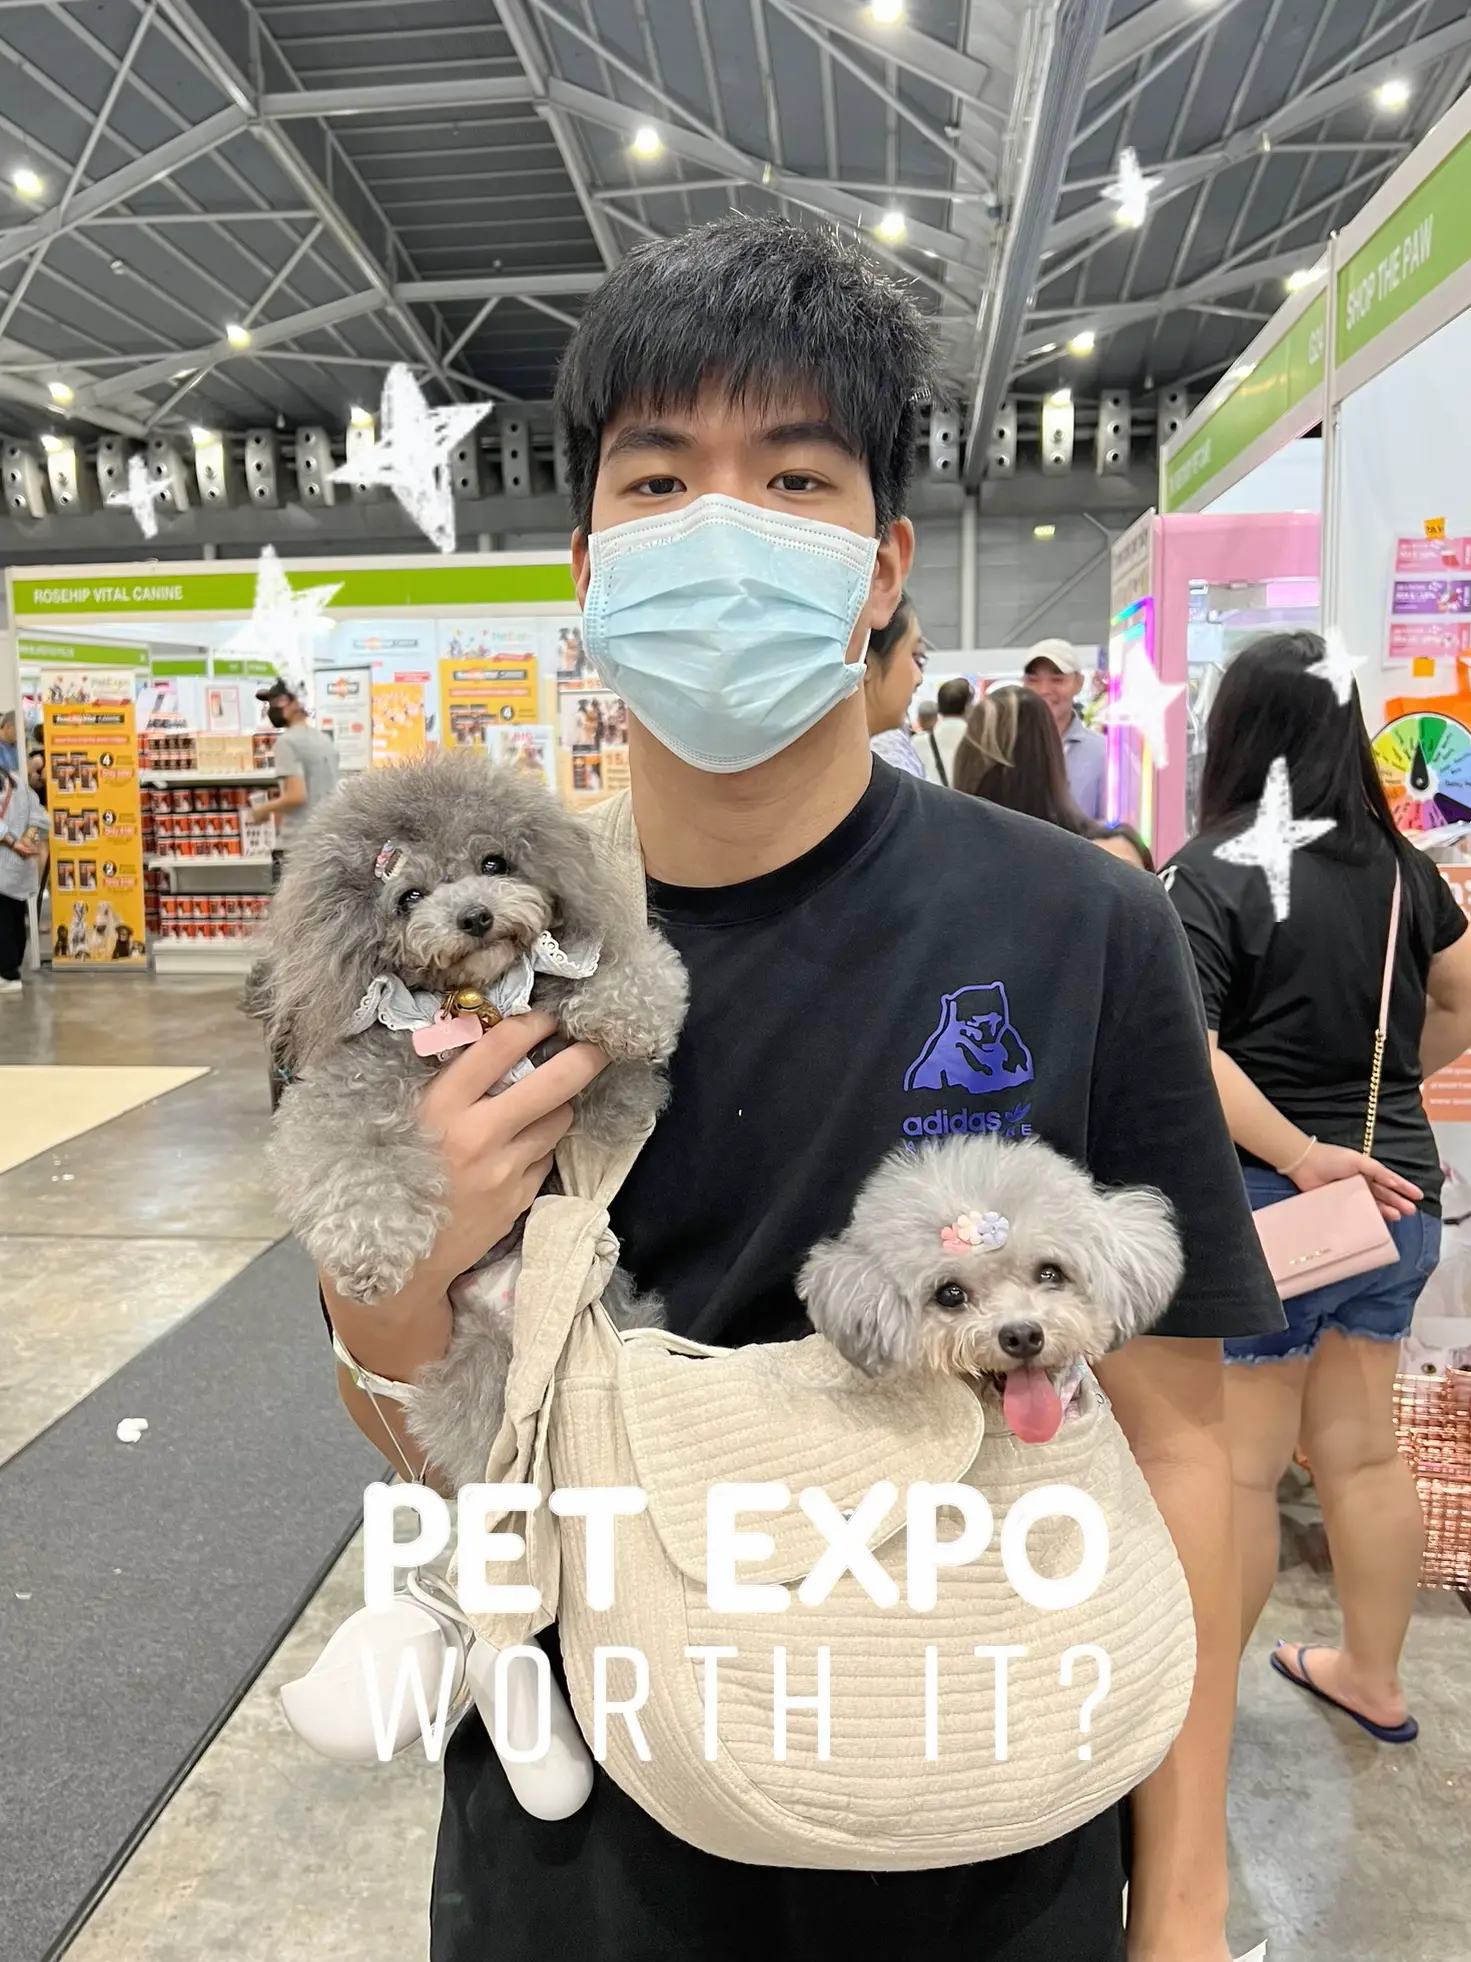 PET EXPO!!! Is it worth it?! 🐶🐱🐹's images(0)